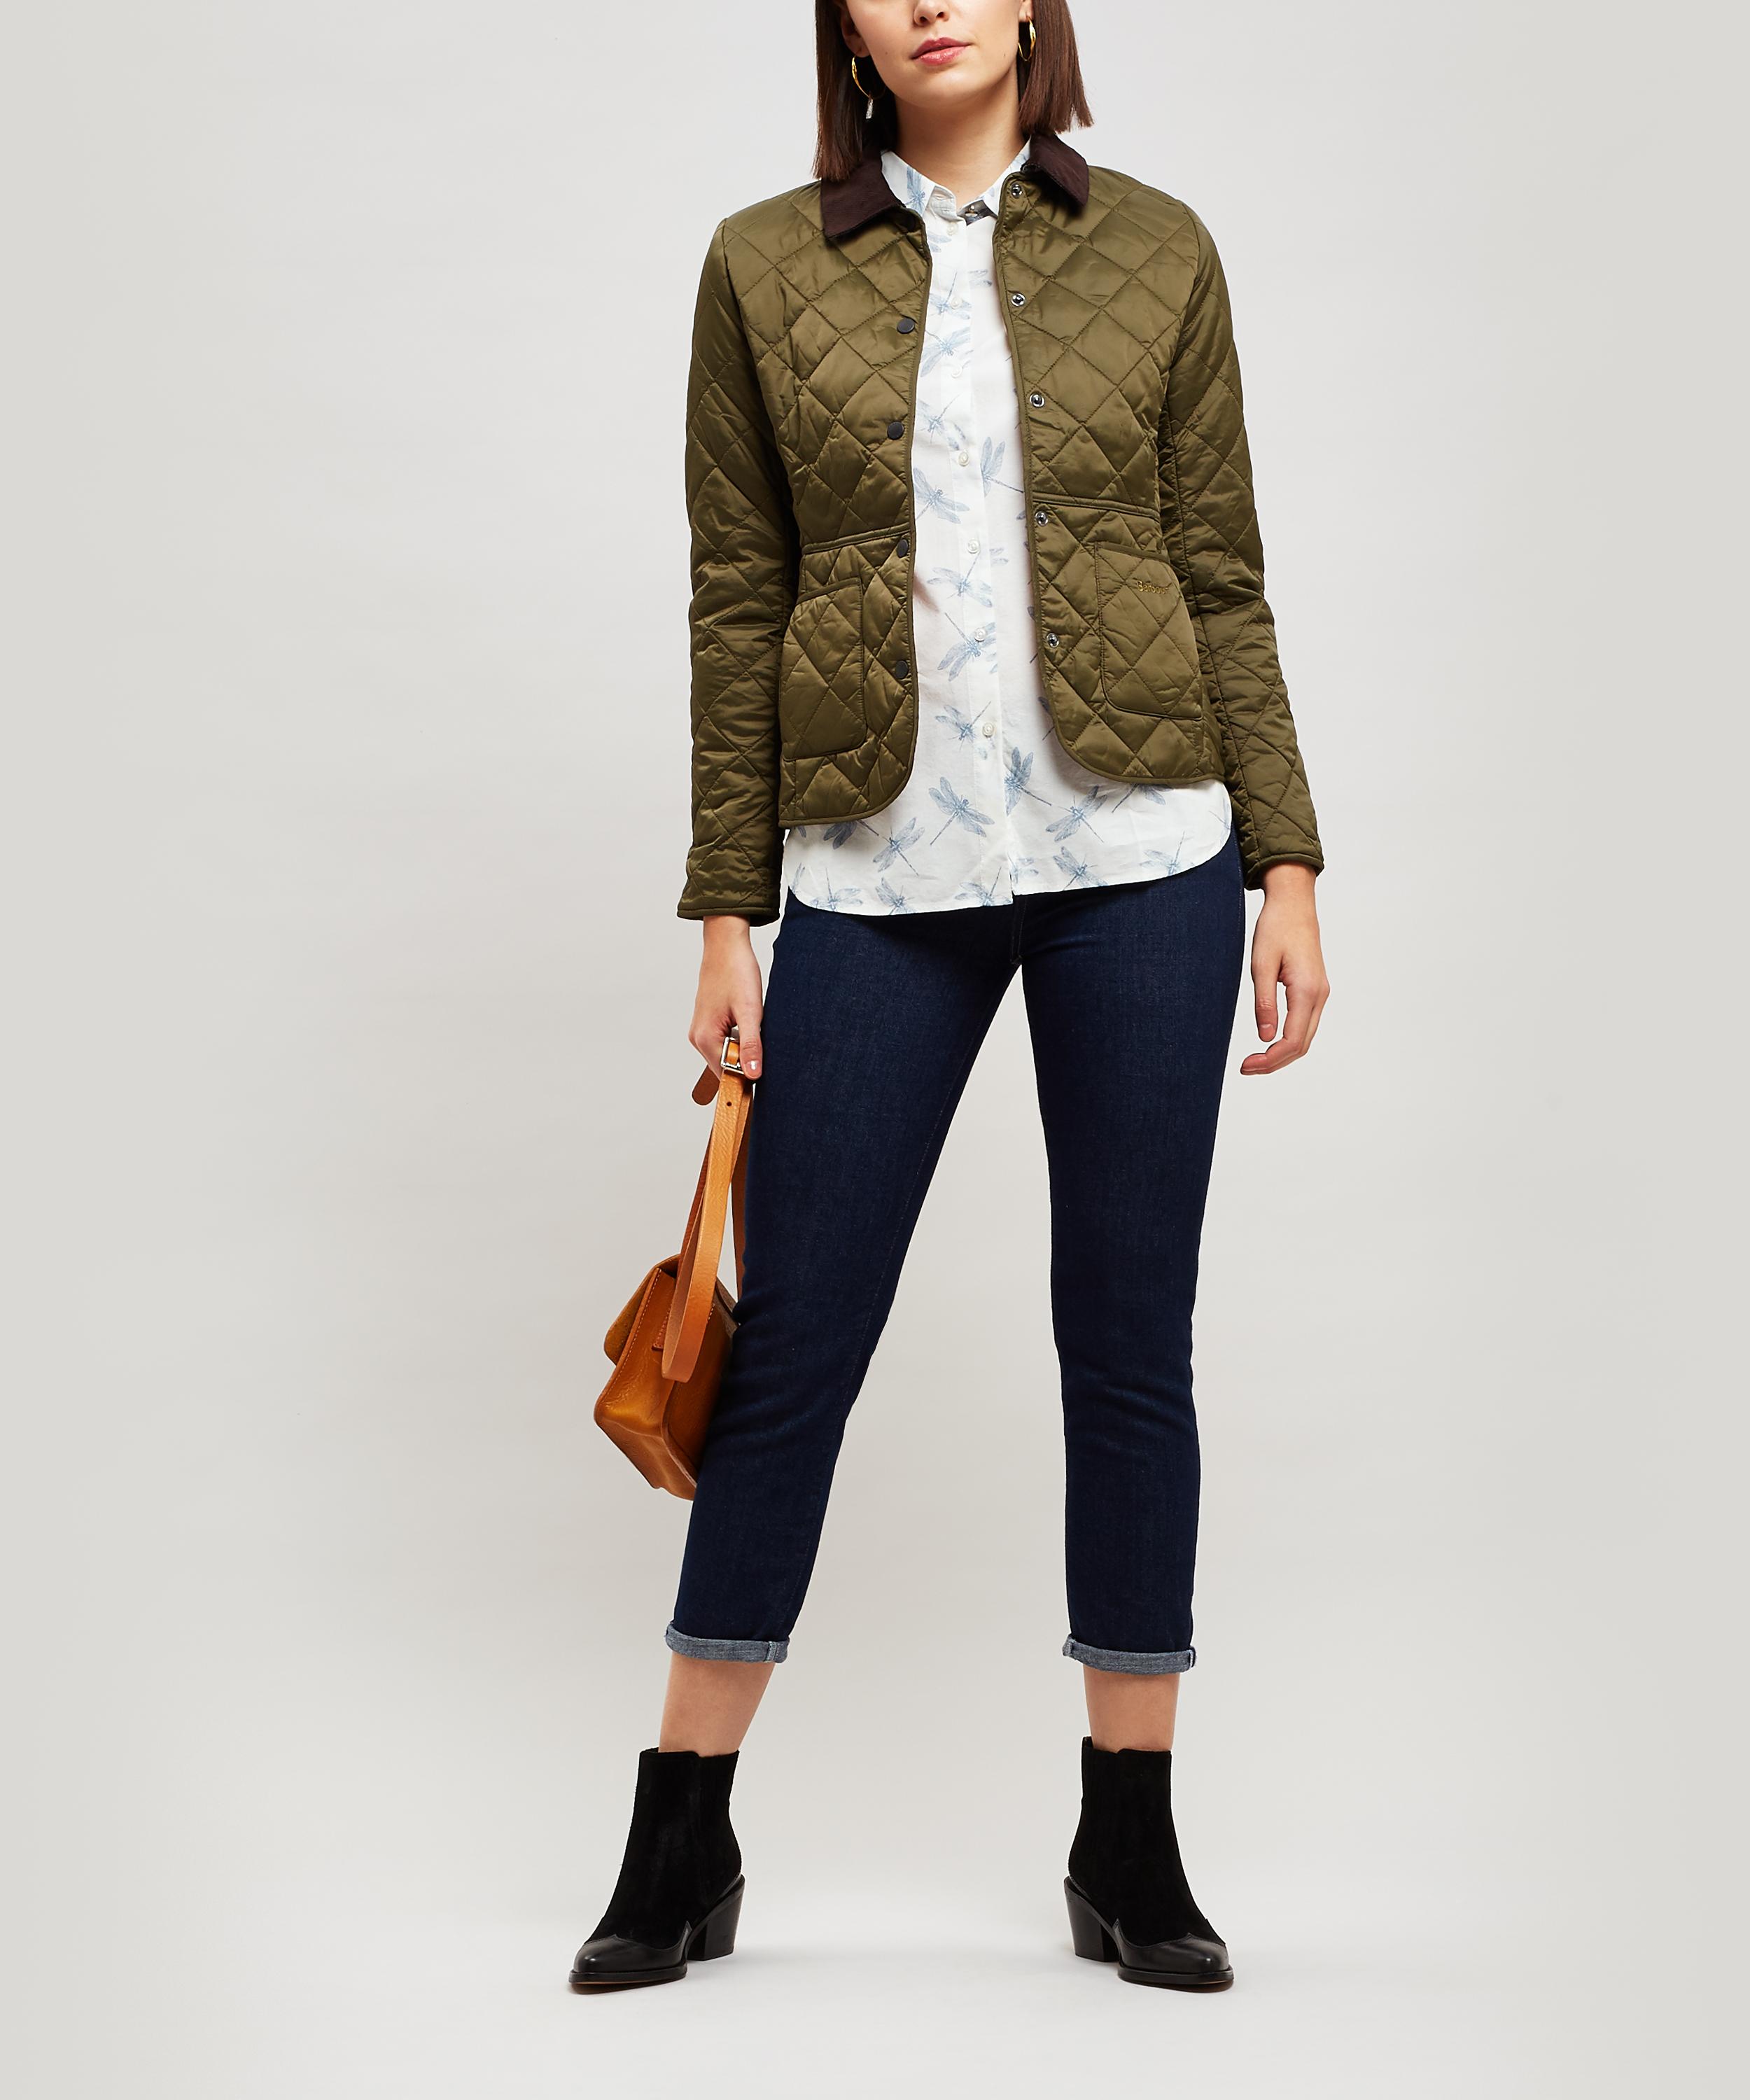 barbour deveron quilted jacket womens